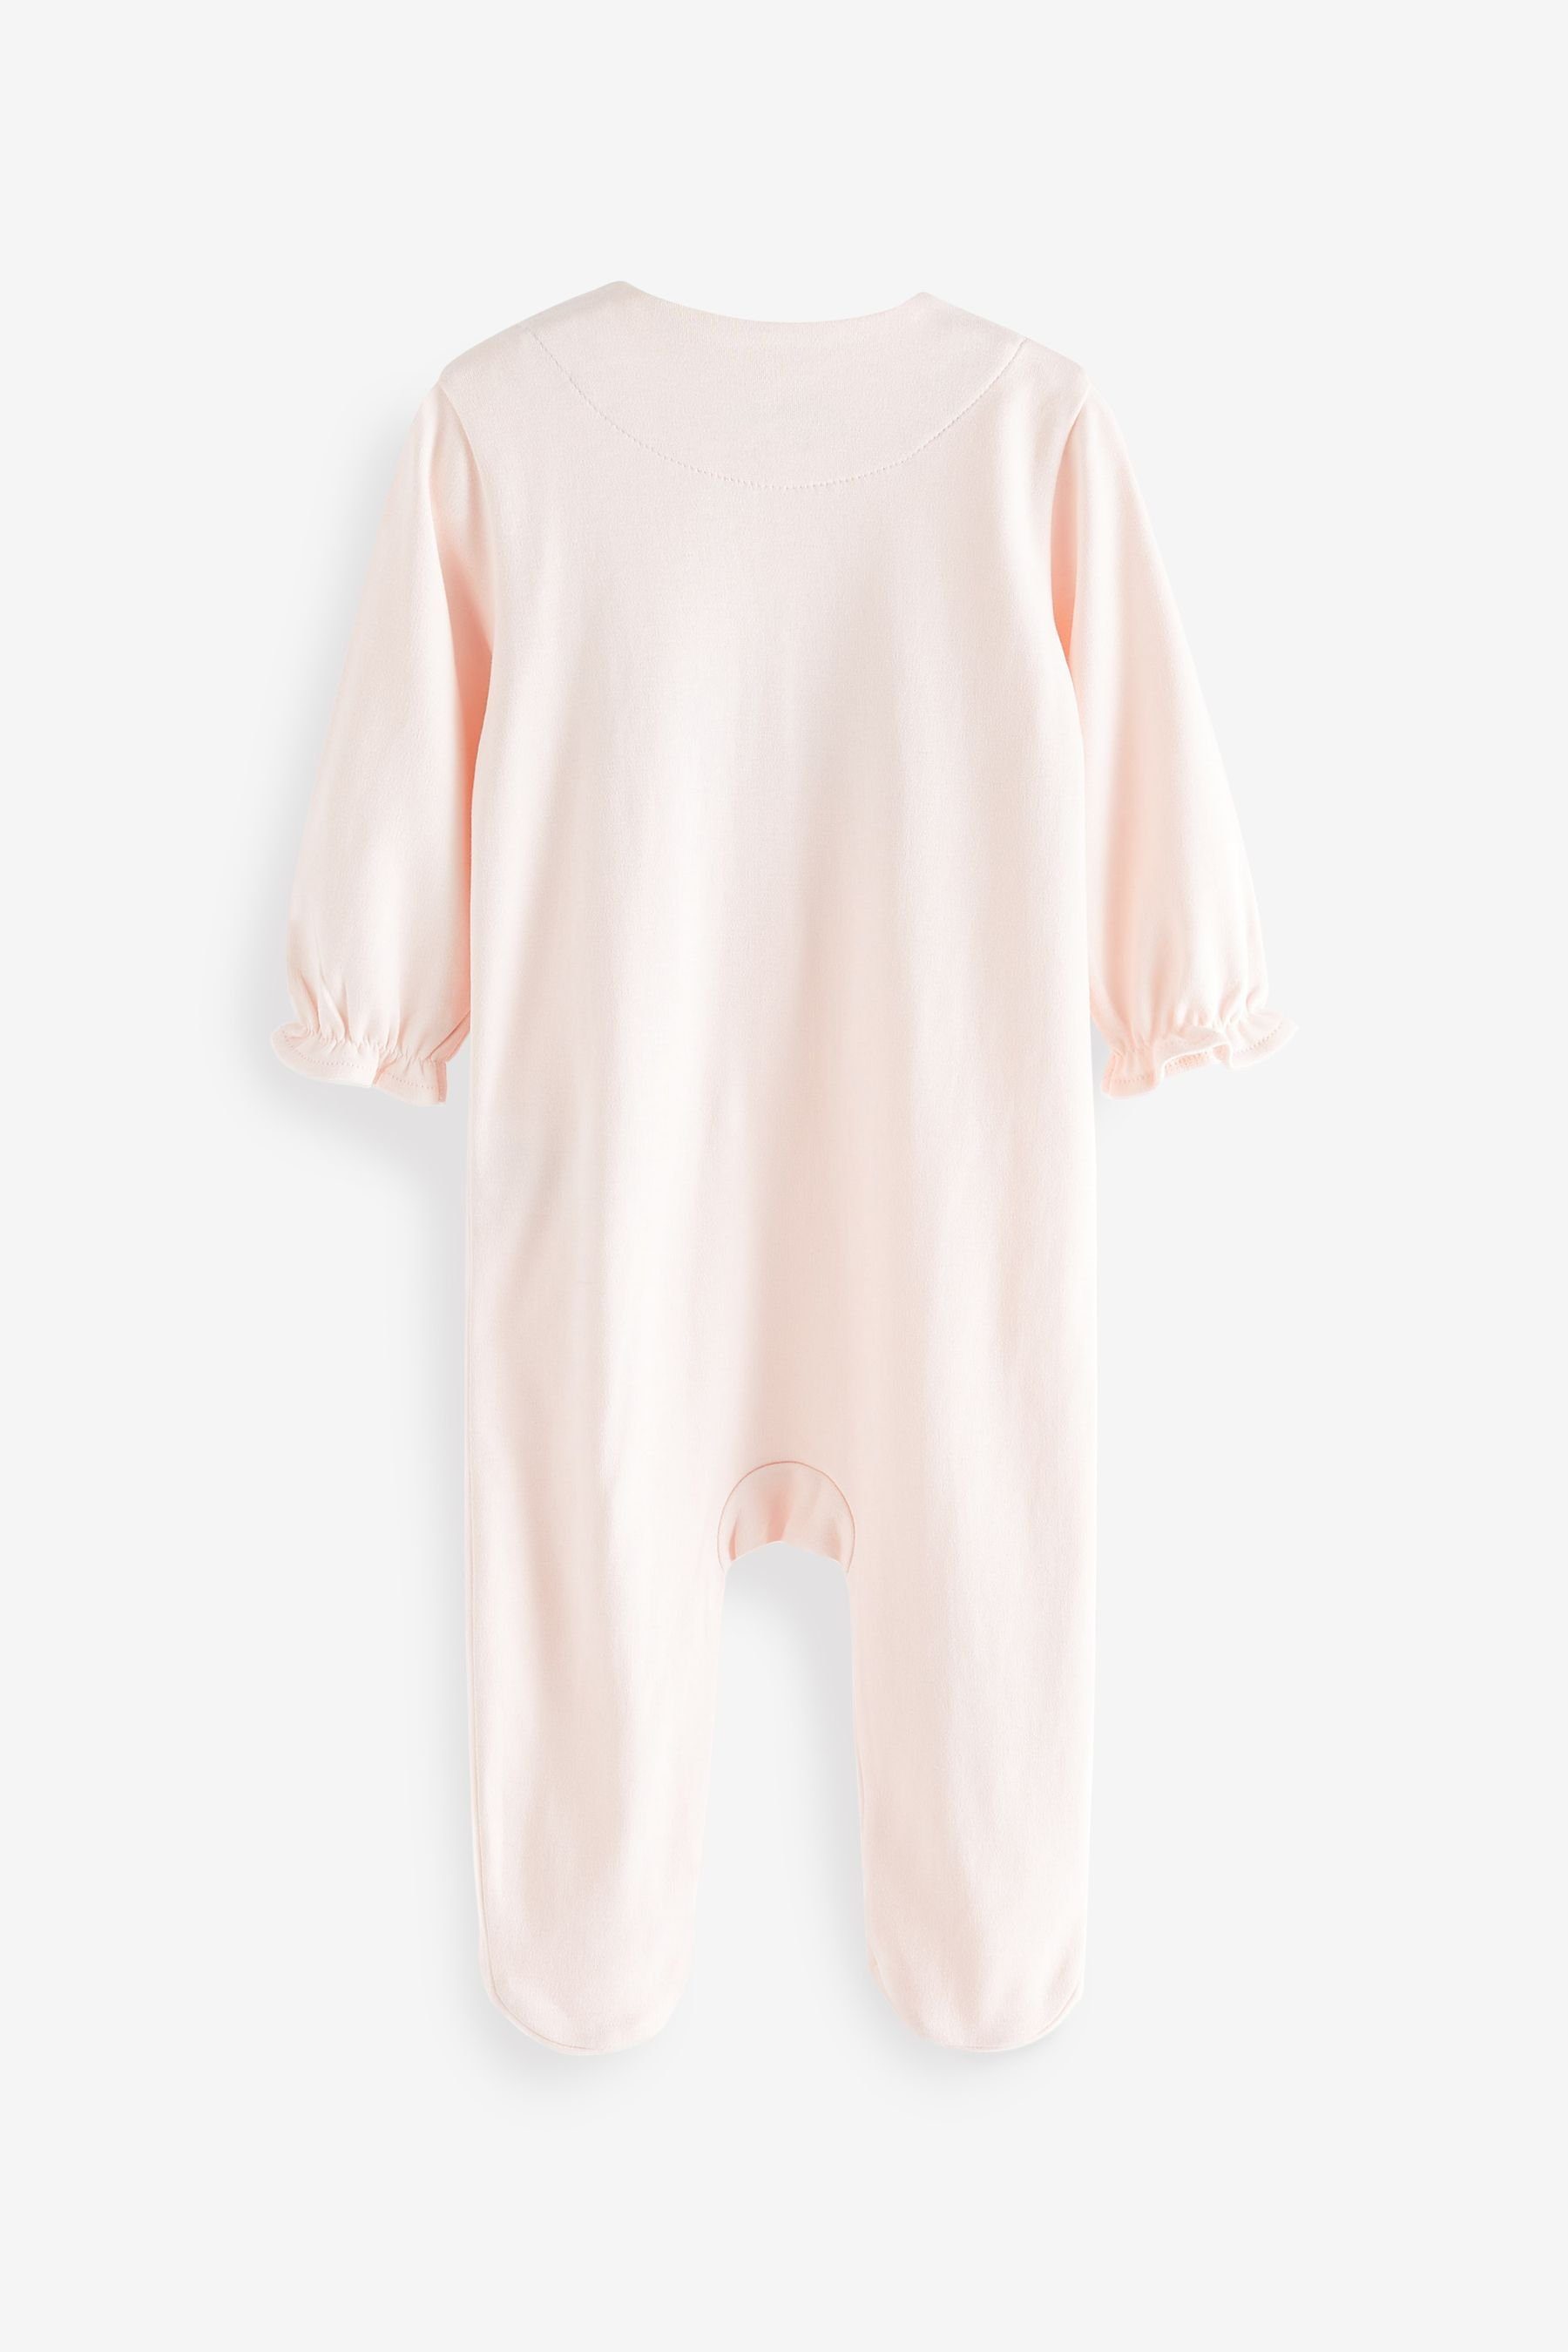 Next Schlafoverall Pyjamas, 3er-Pack Pale Bunny/Floral (3-tlg) Pink